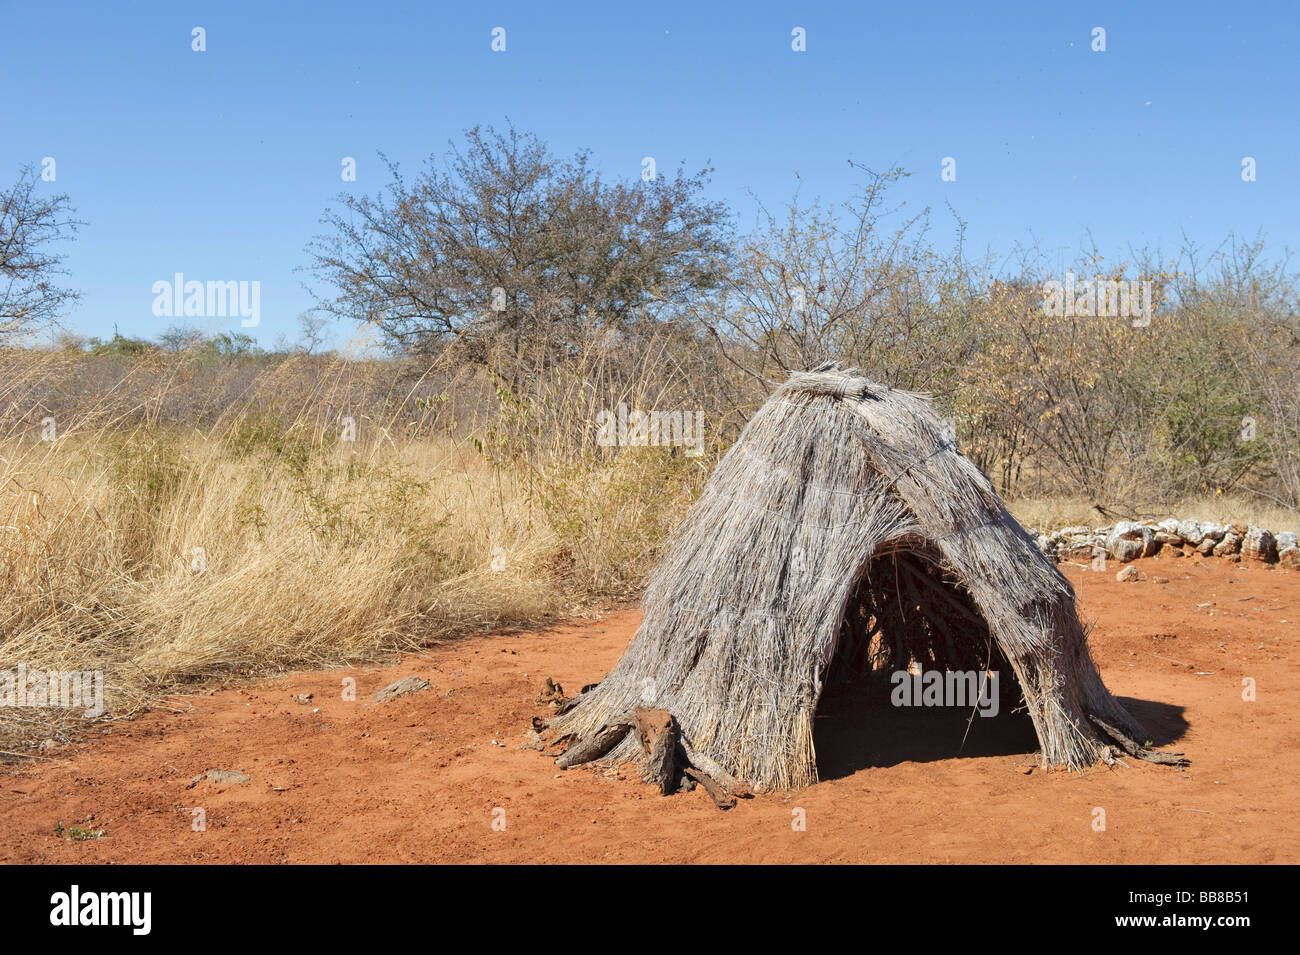 Bushman's hut in an open air museum, Cultural Village, Tsumeb, Namibia, Africa Stock Photo